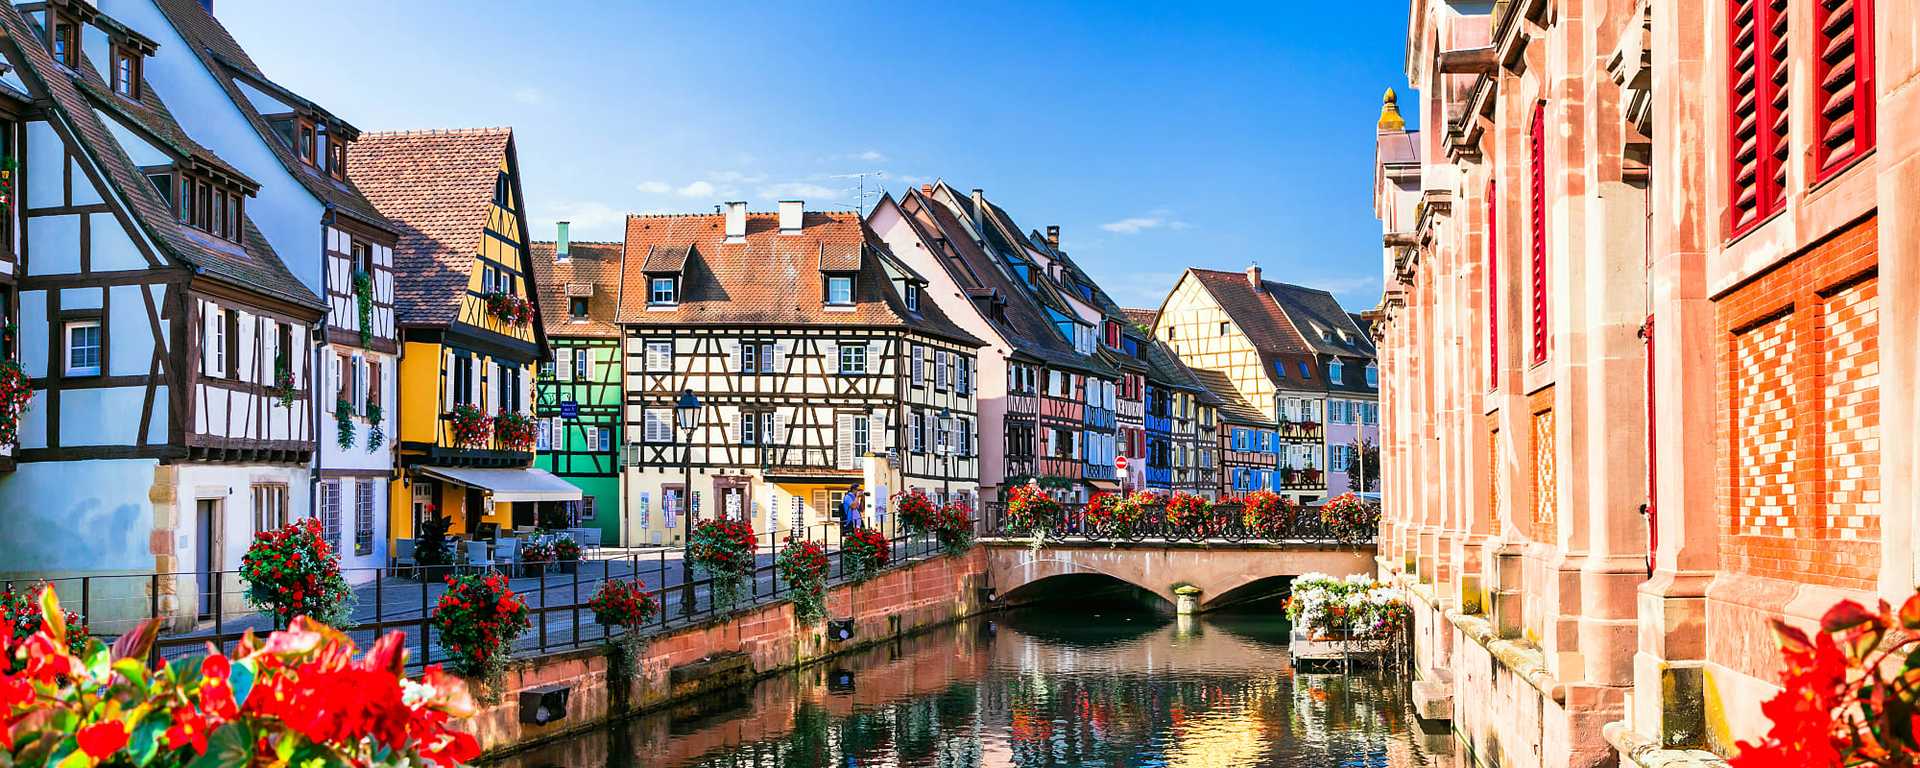 Half timber houses along the canal in Colmar, France